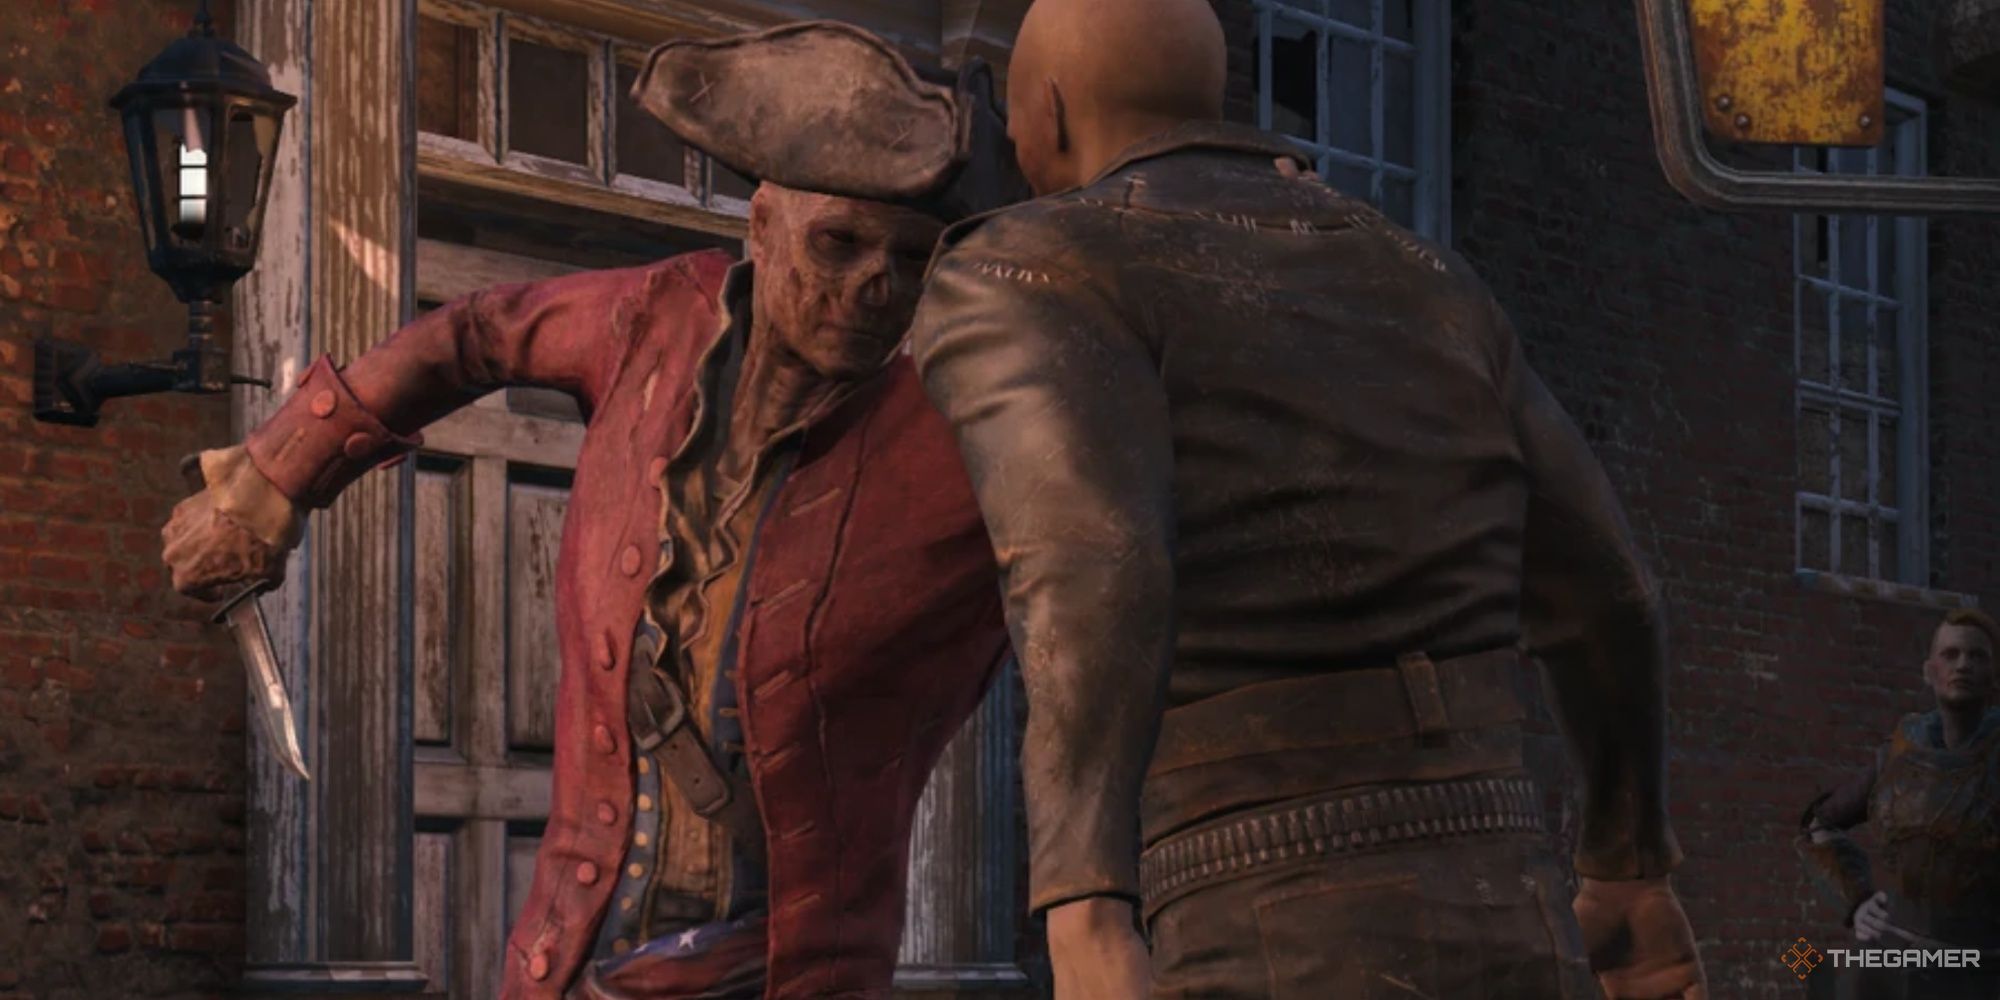 John Hancock, a ghoul from Fallout 4 dressed as a redcoat from the American Civil War, grabbing someone and preparing to stab them.